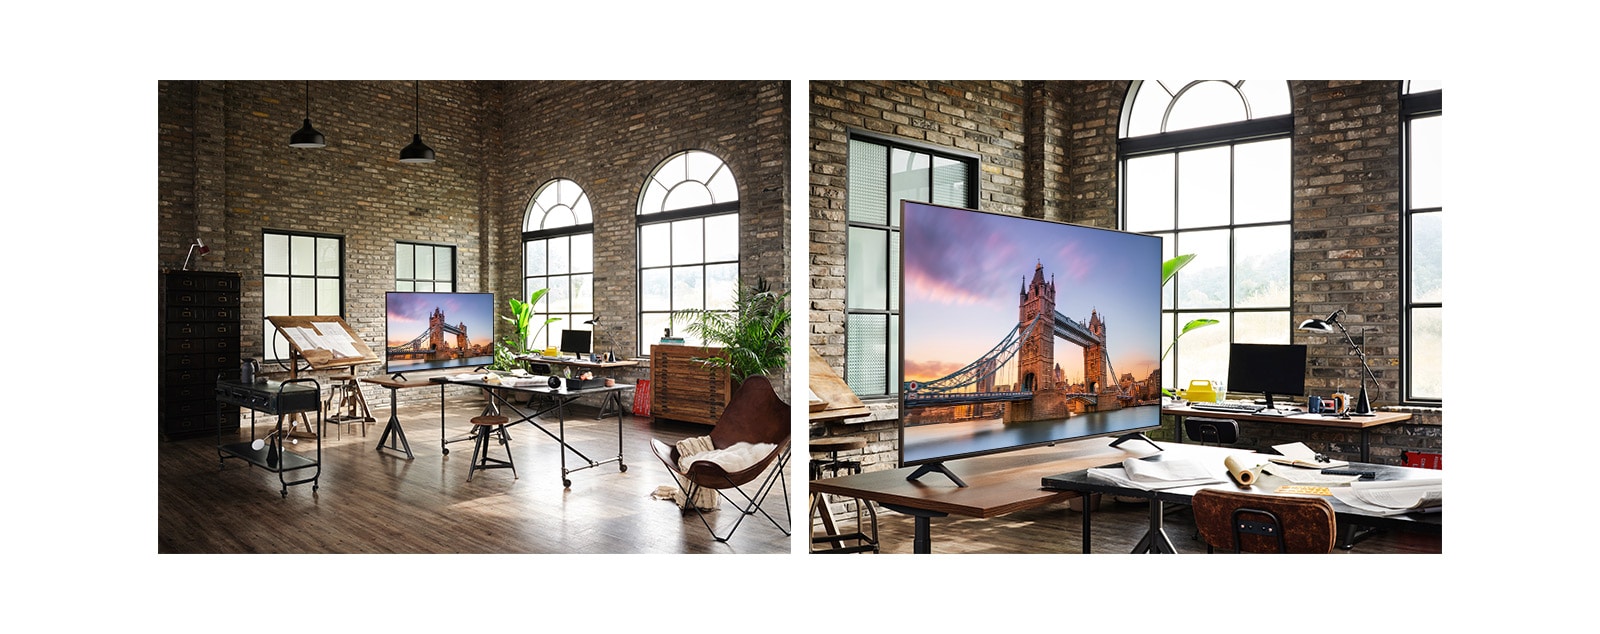 There is a TV showing a picture of London Bridge in an old-fashioned workroom.  Close-up of a TV showing an image of London Bridge on a table in an old-fashioned workroom.